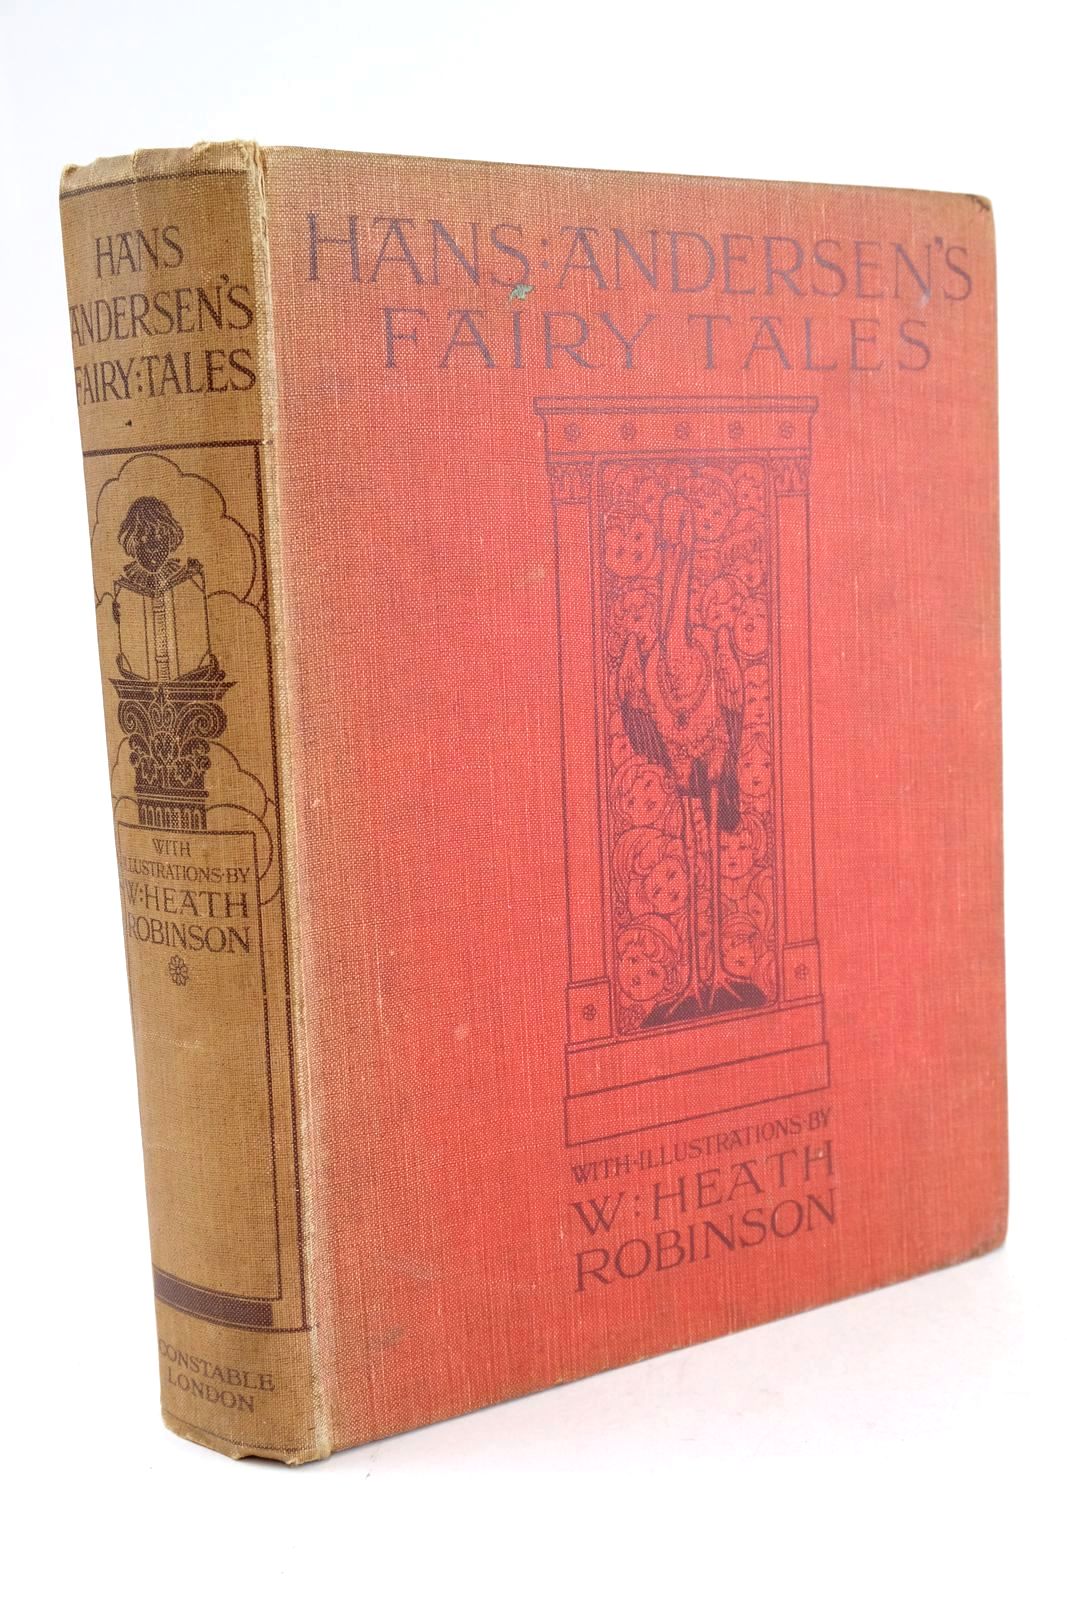 Photo of HANS ANDERSEN'S FAIRY TALES written by Andersen, Hans Christian illustrated by Robinson, W. Heath published by Constable &amp; Co. Ltd. (STOCK CODE: 1325108)  for sale by Stella & Rose's Books